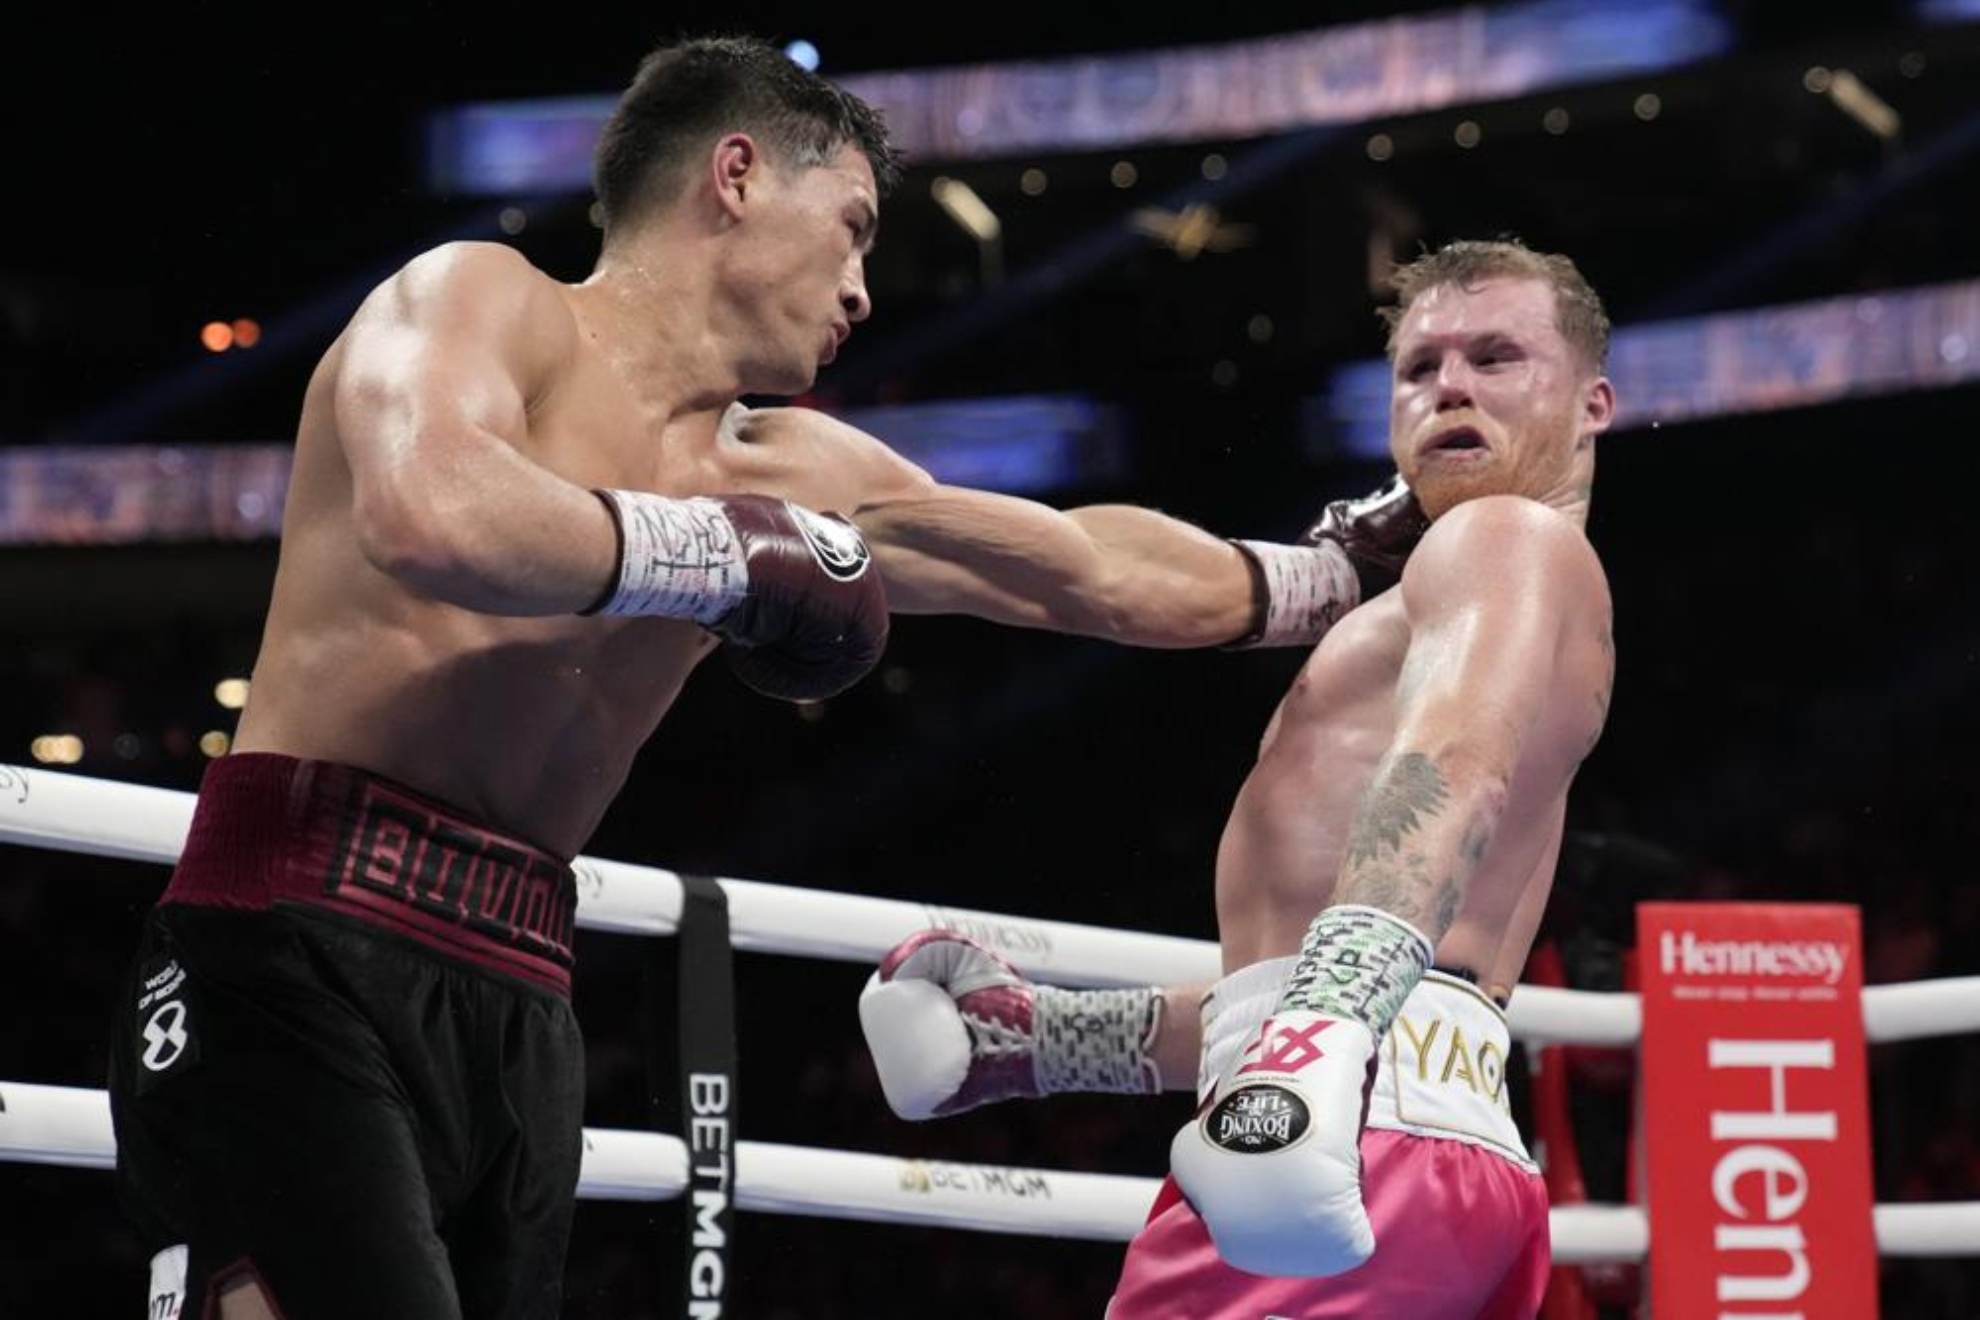 Dmitry Bivol, left, of Kyrgyzstan, throws a punch against Canelo Alvarez, of Mexico, during a light heavyweight title fight, Saturday, May 7, 2022, in Las Vegas